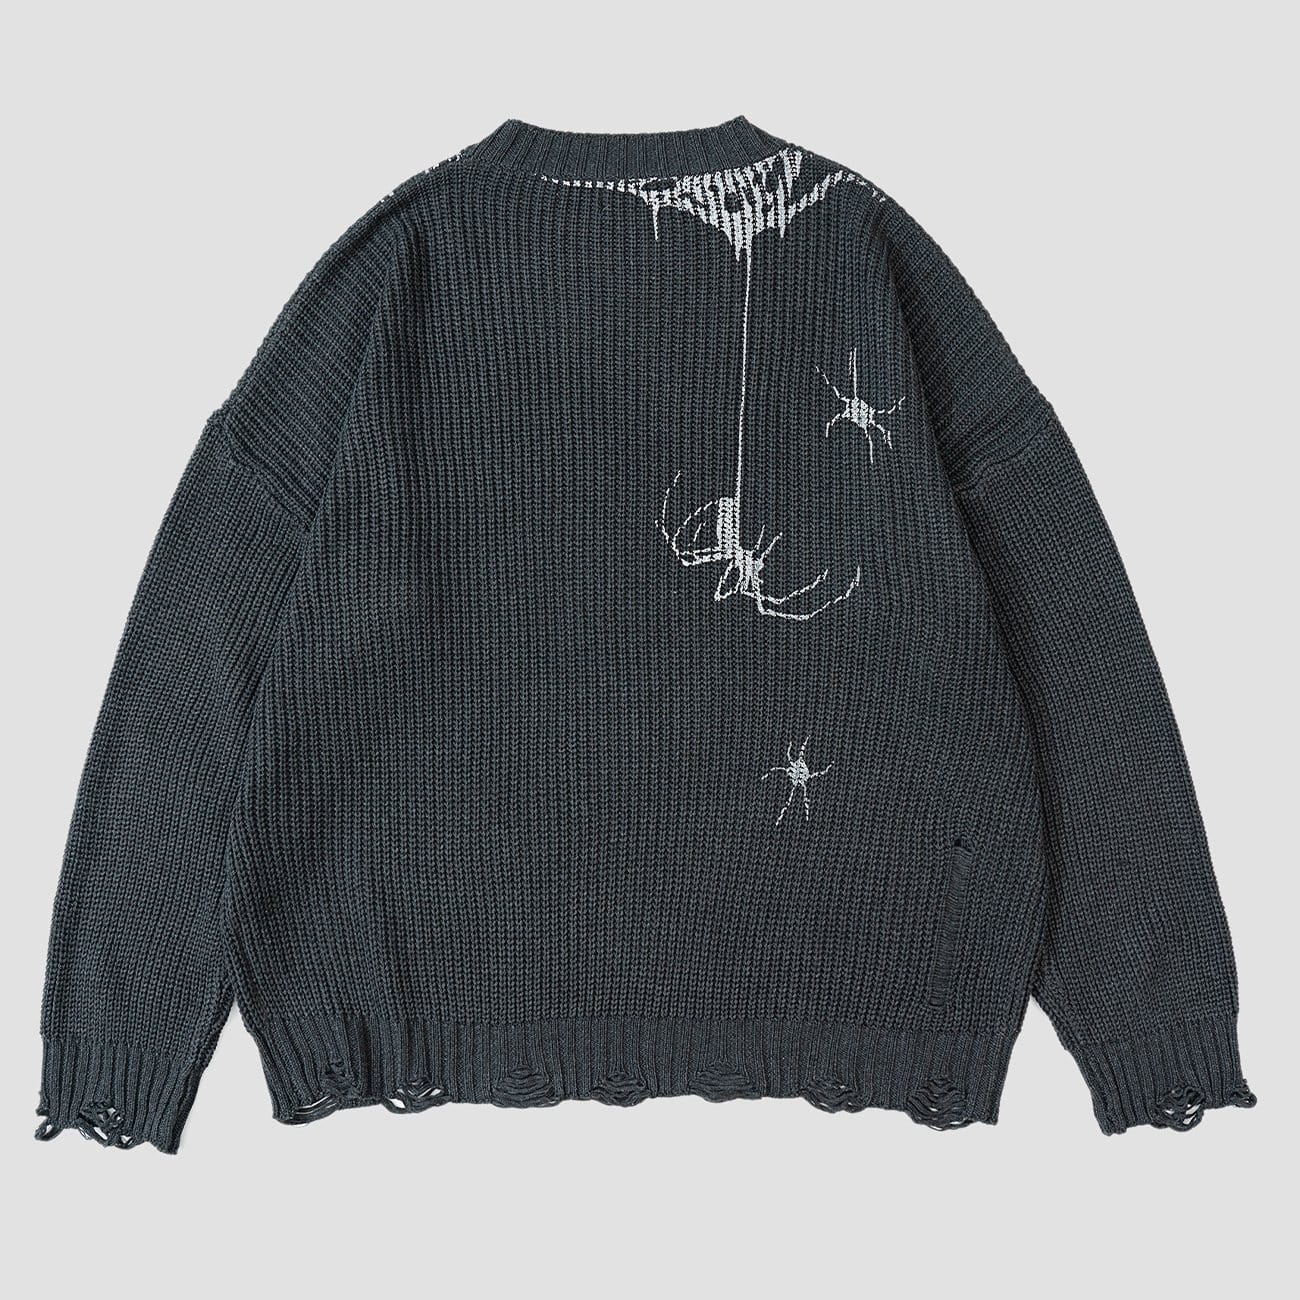 TO Dark Spider Creation Ripped Hole Knitted Sweater